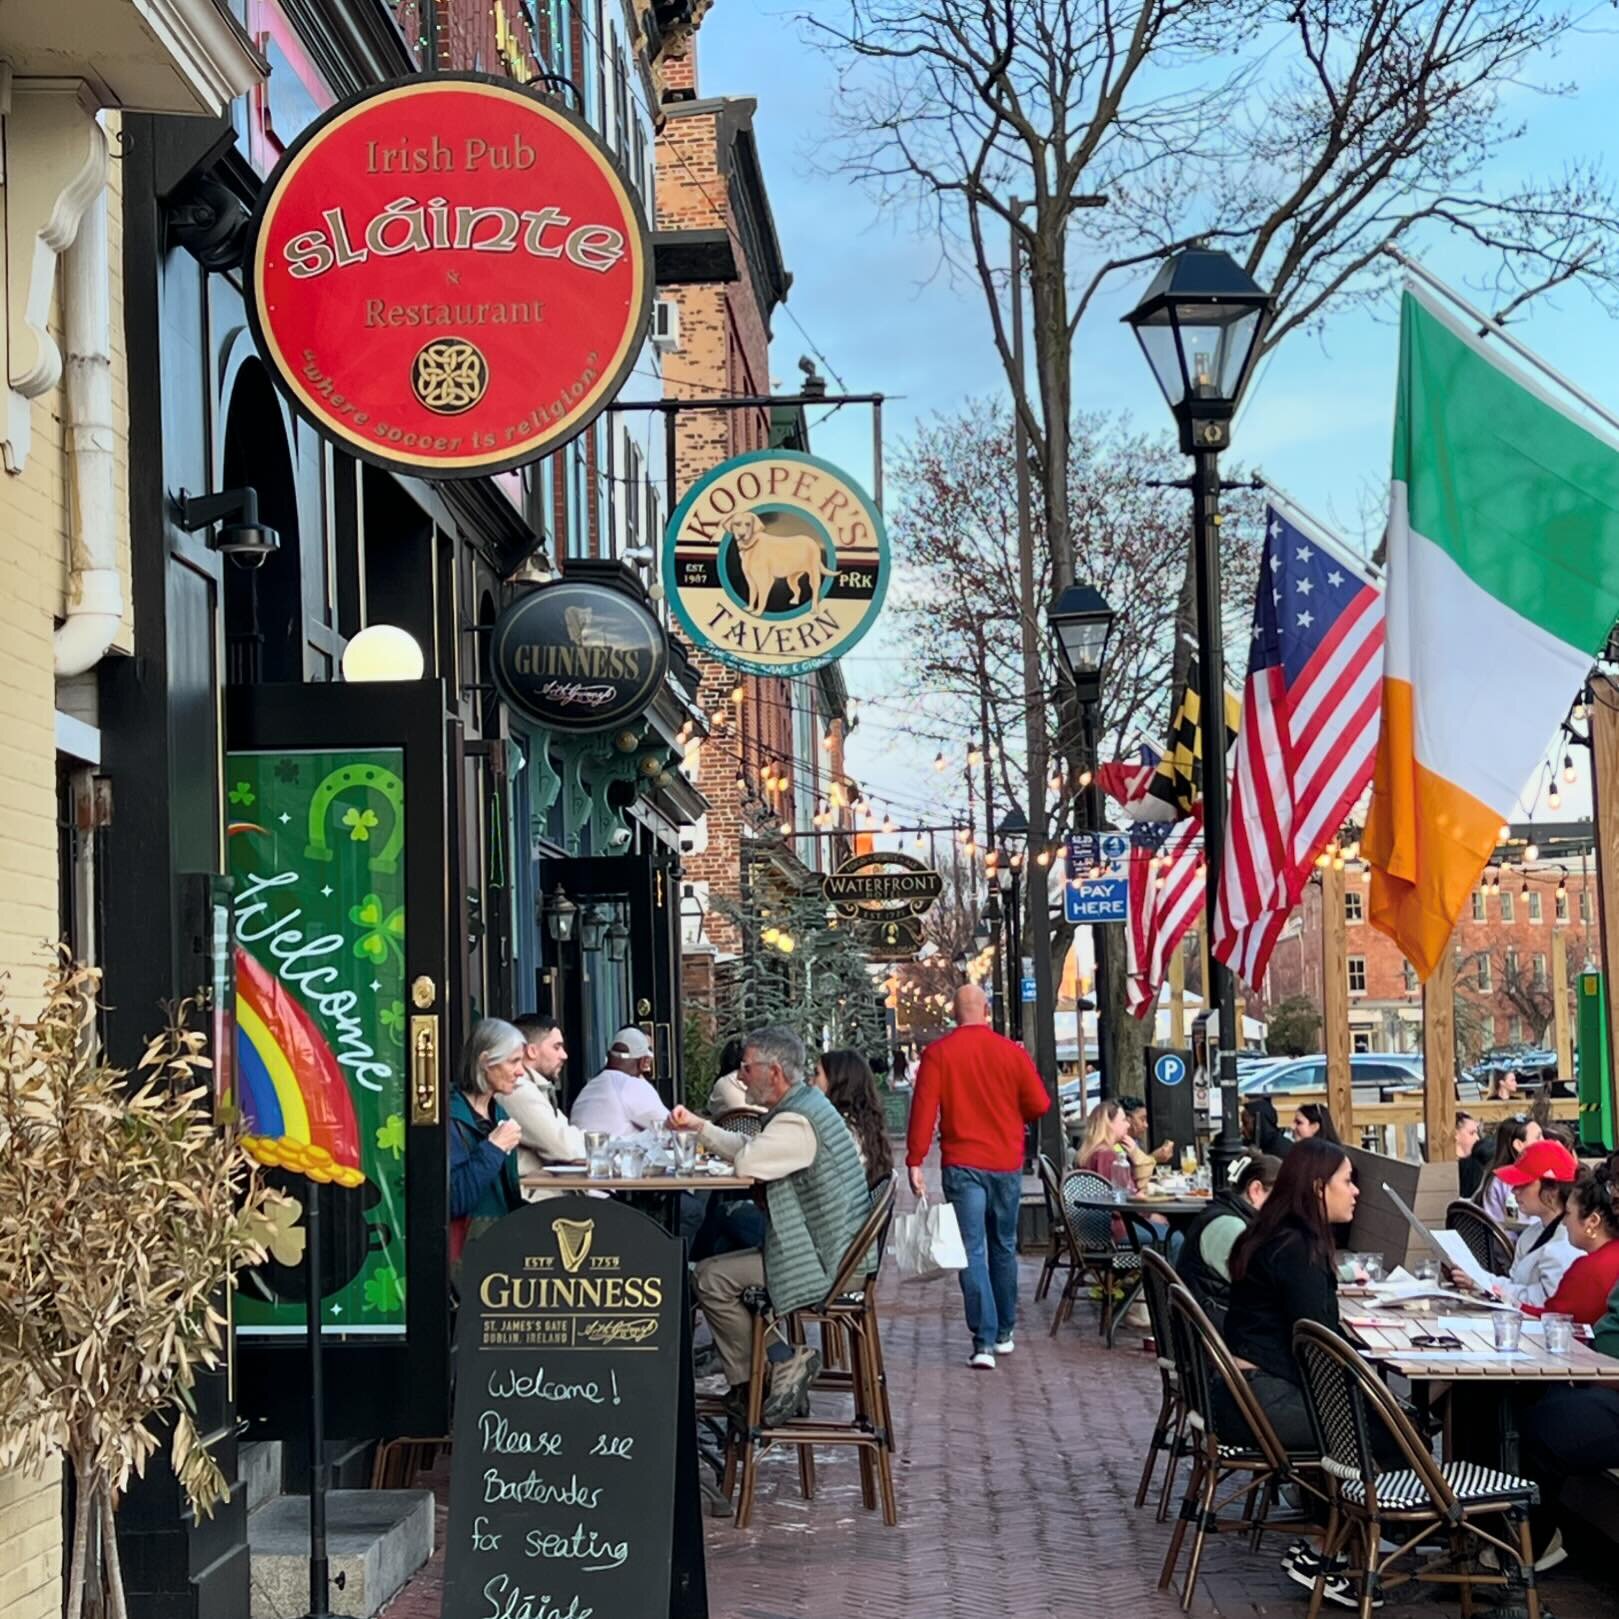 It&rsquo;s time for a great weekend in Fell&rsquo;s Point!☘️💚 #fellspointmainstreet #fellspoint #neighborhood